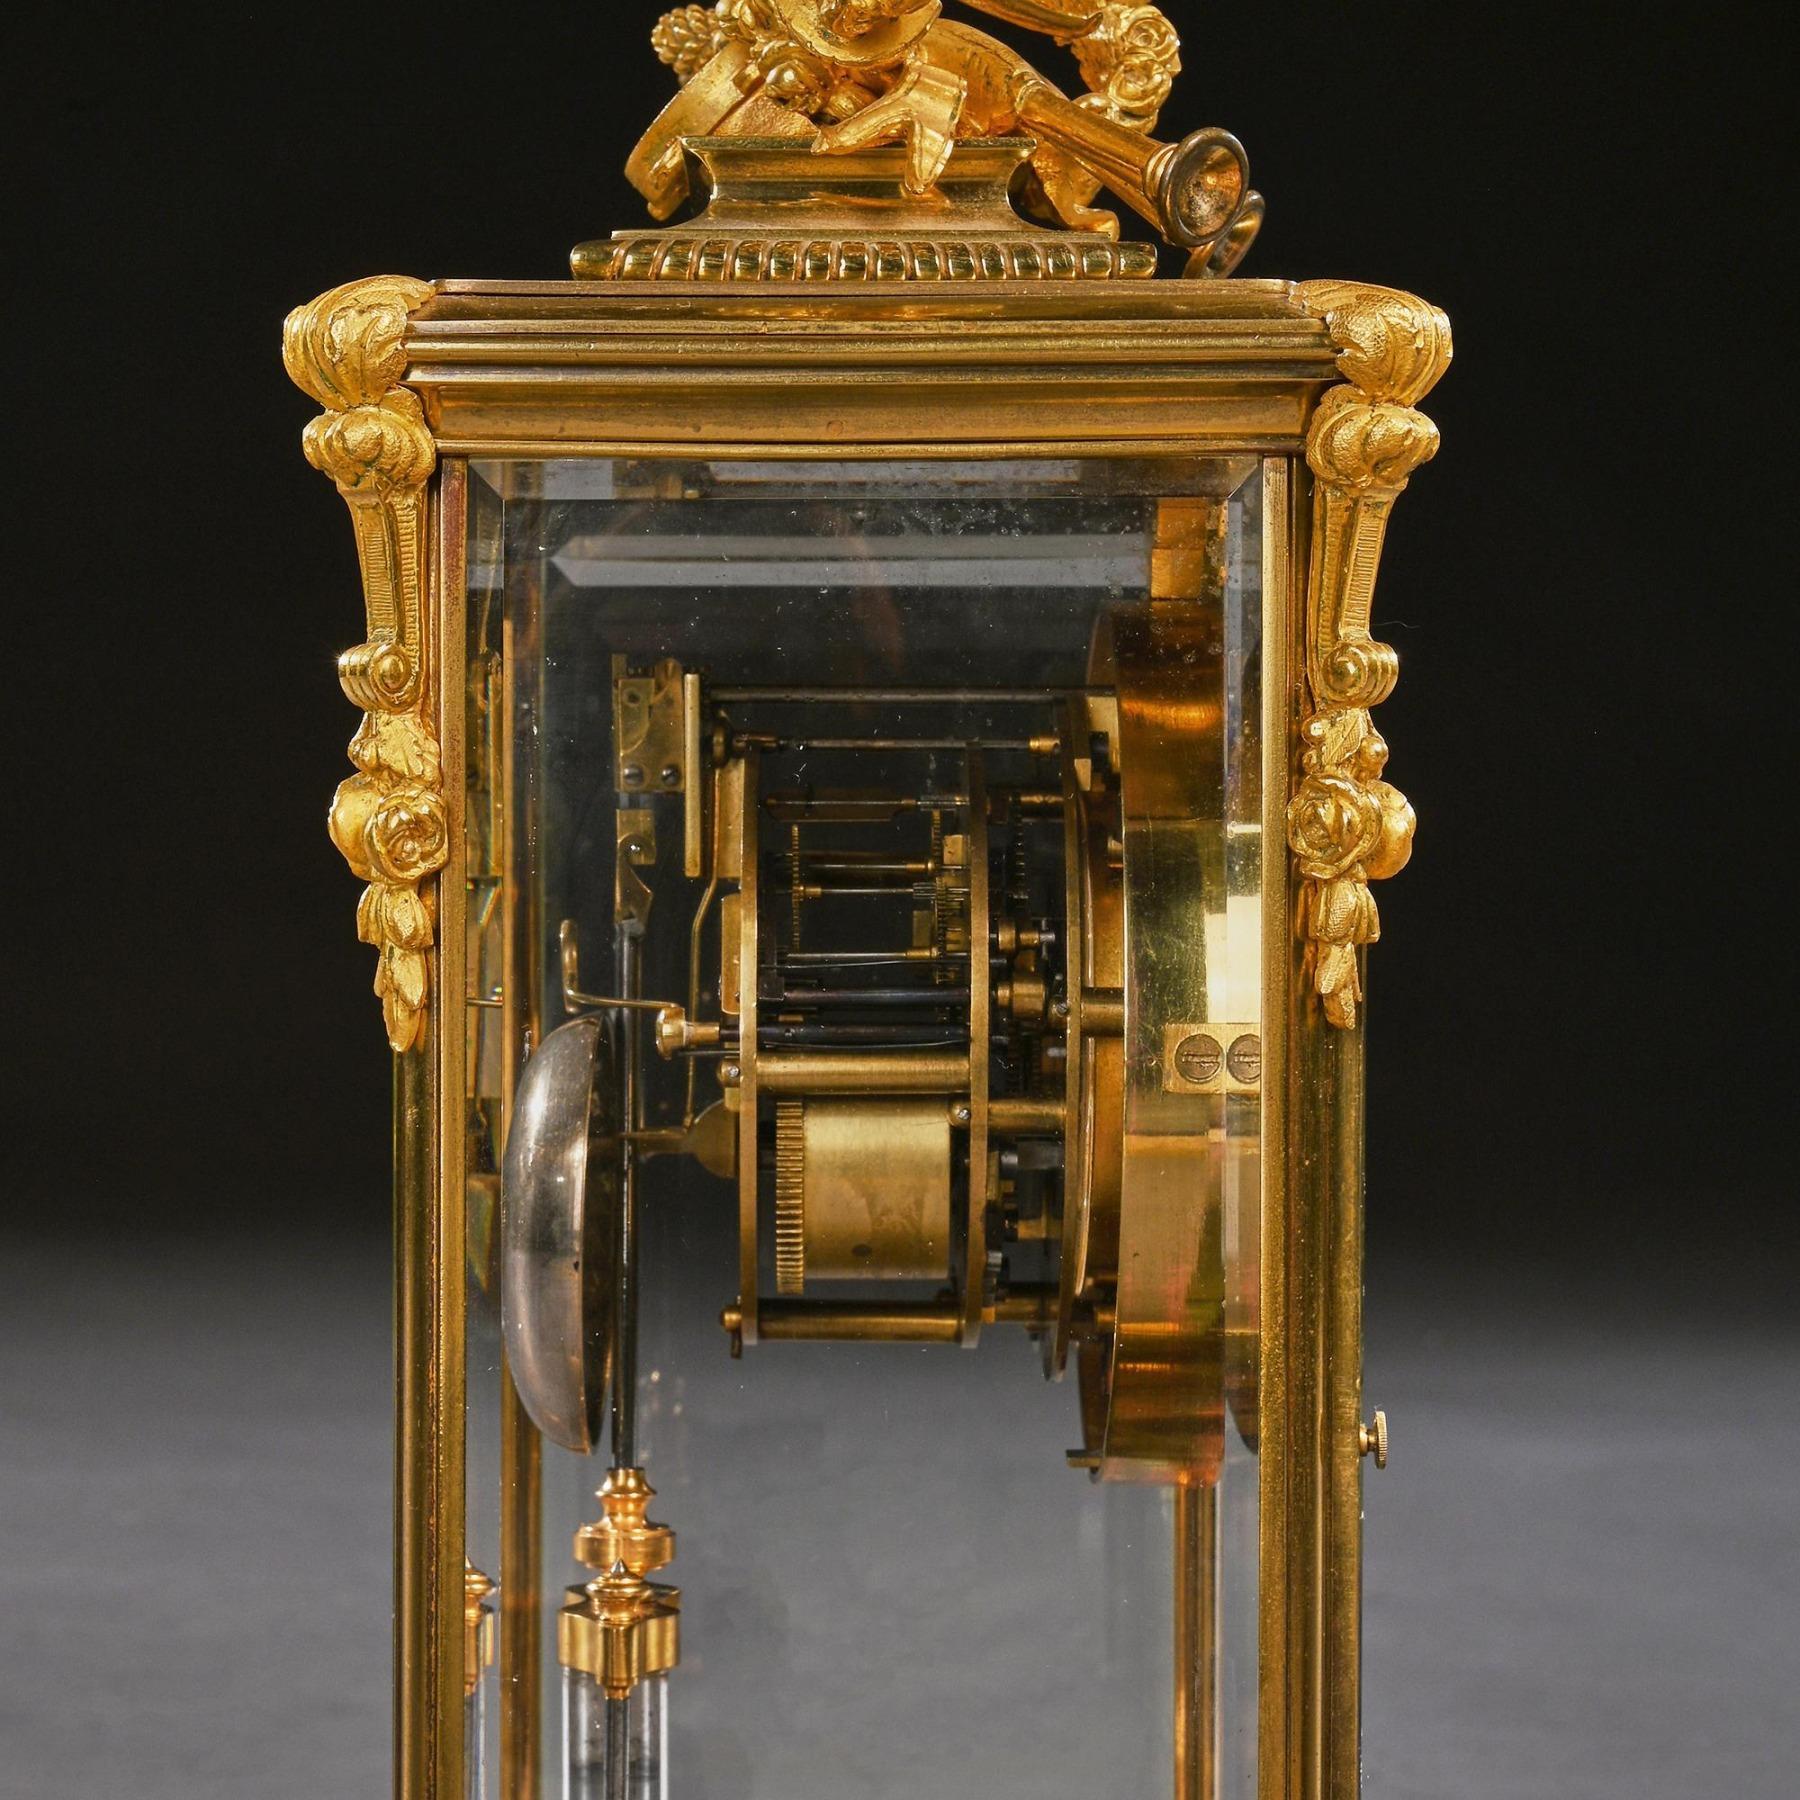 French 8-day striking four glass ormolu clock by Samuel Marti, Paris, 19th century.

An ormolu-mounted French 8 day striking four glass mantel clock by Samuel Marti Paris stand in its original velvet and water gilt plinth.

French, circa